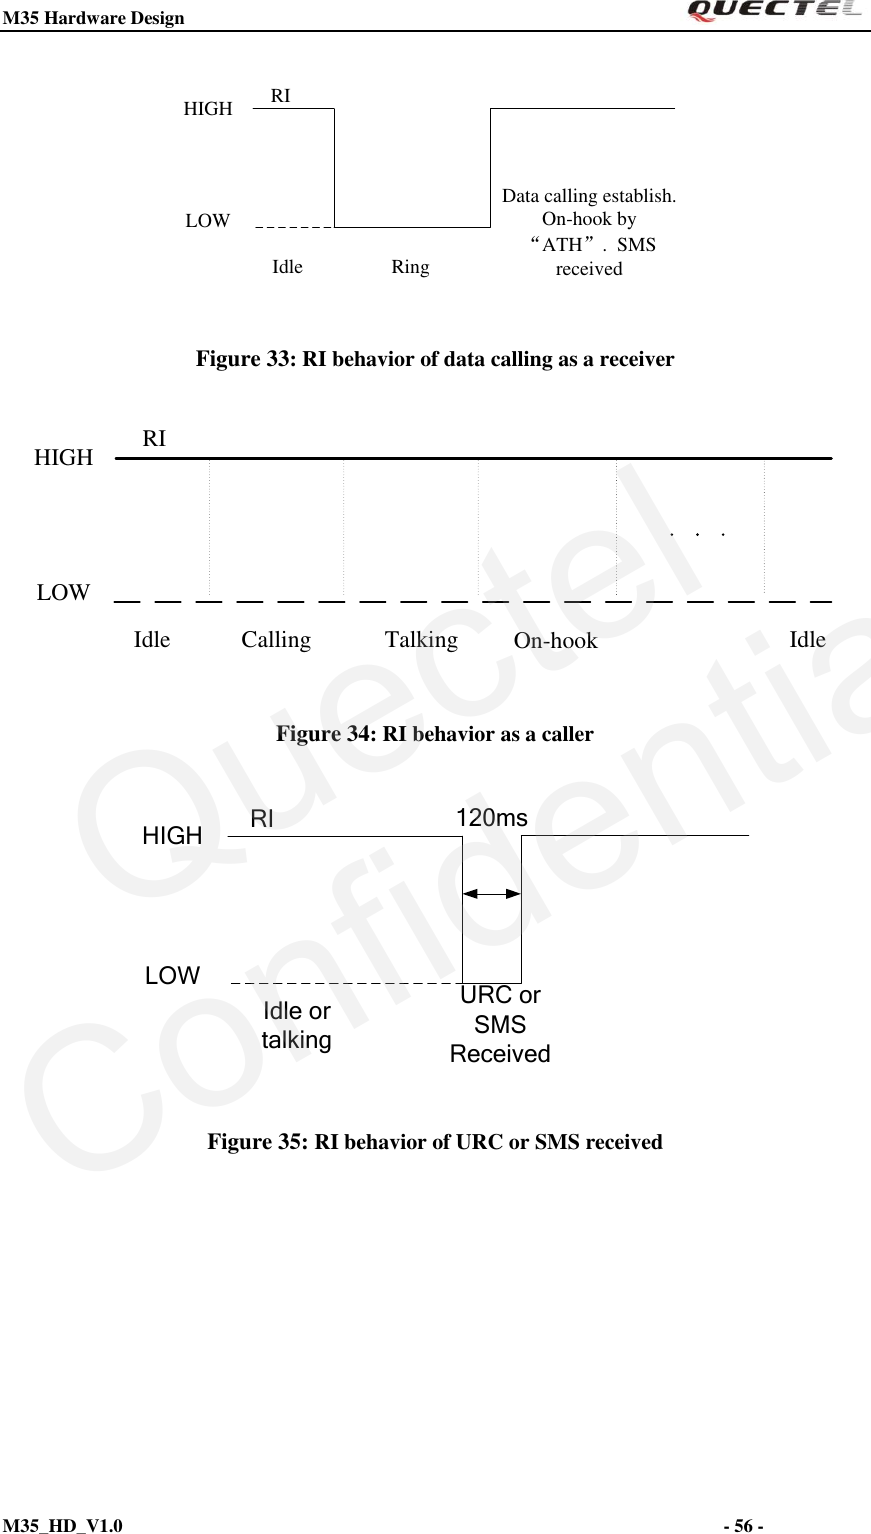 M35 Hardware Design                                                                  M35_HD_V1.0                                                                                                                         - 56 -    RIIdle RingData calling establish. On-hook by “ATH”.  SMS receivedHIGHLOW Figure 33: RI behavior of data calling as a receiver RIIdle Calling On-hookTalkingHIGHLOWIdle Figure 34: RI behavior as a caller RIIdle or talking URC or                   SMS Received HIGHLOW120ms Figure 35: RI behavior of URC or SMS received      QuectelConfidential